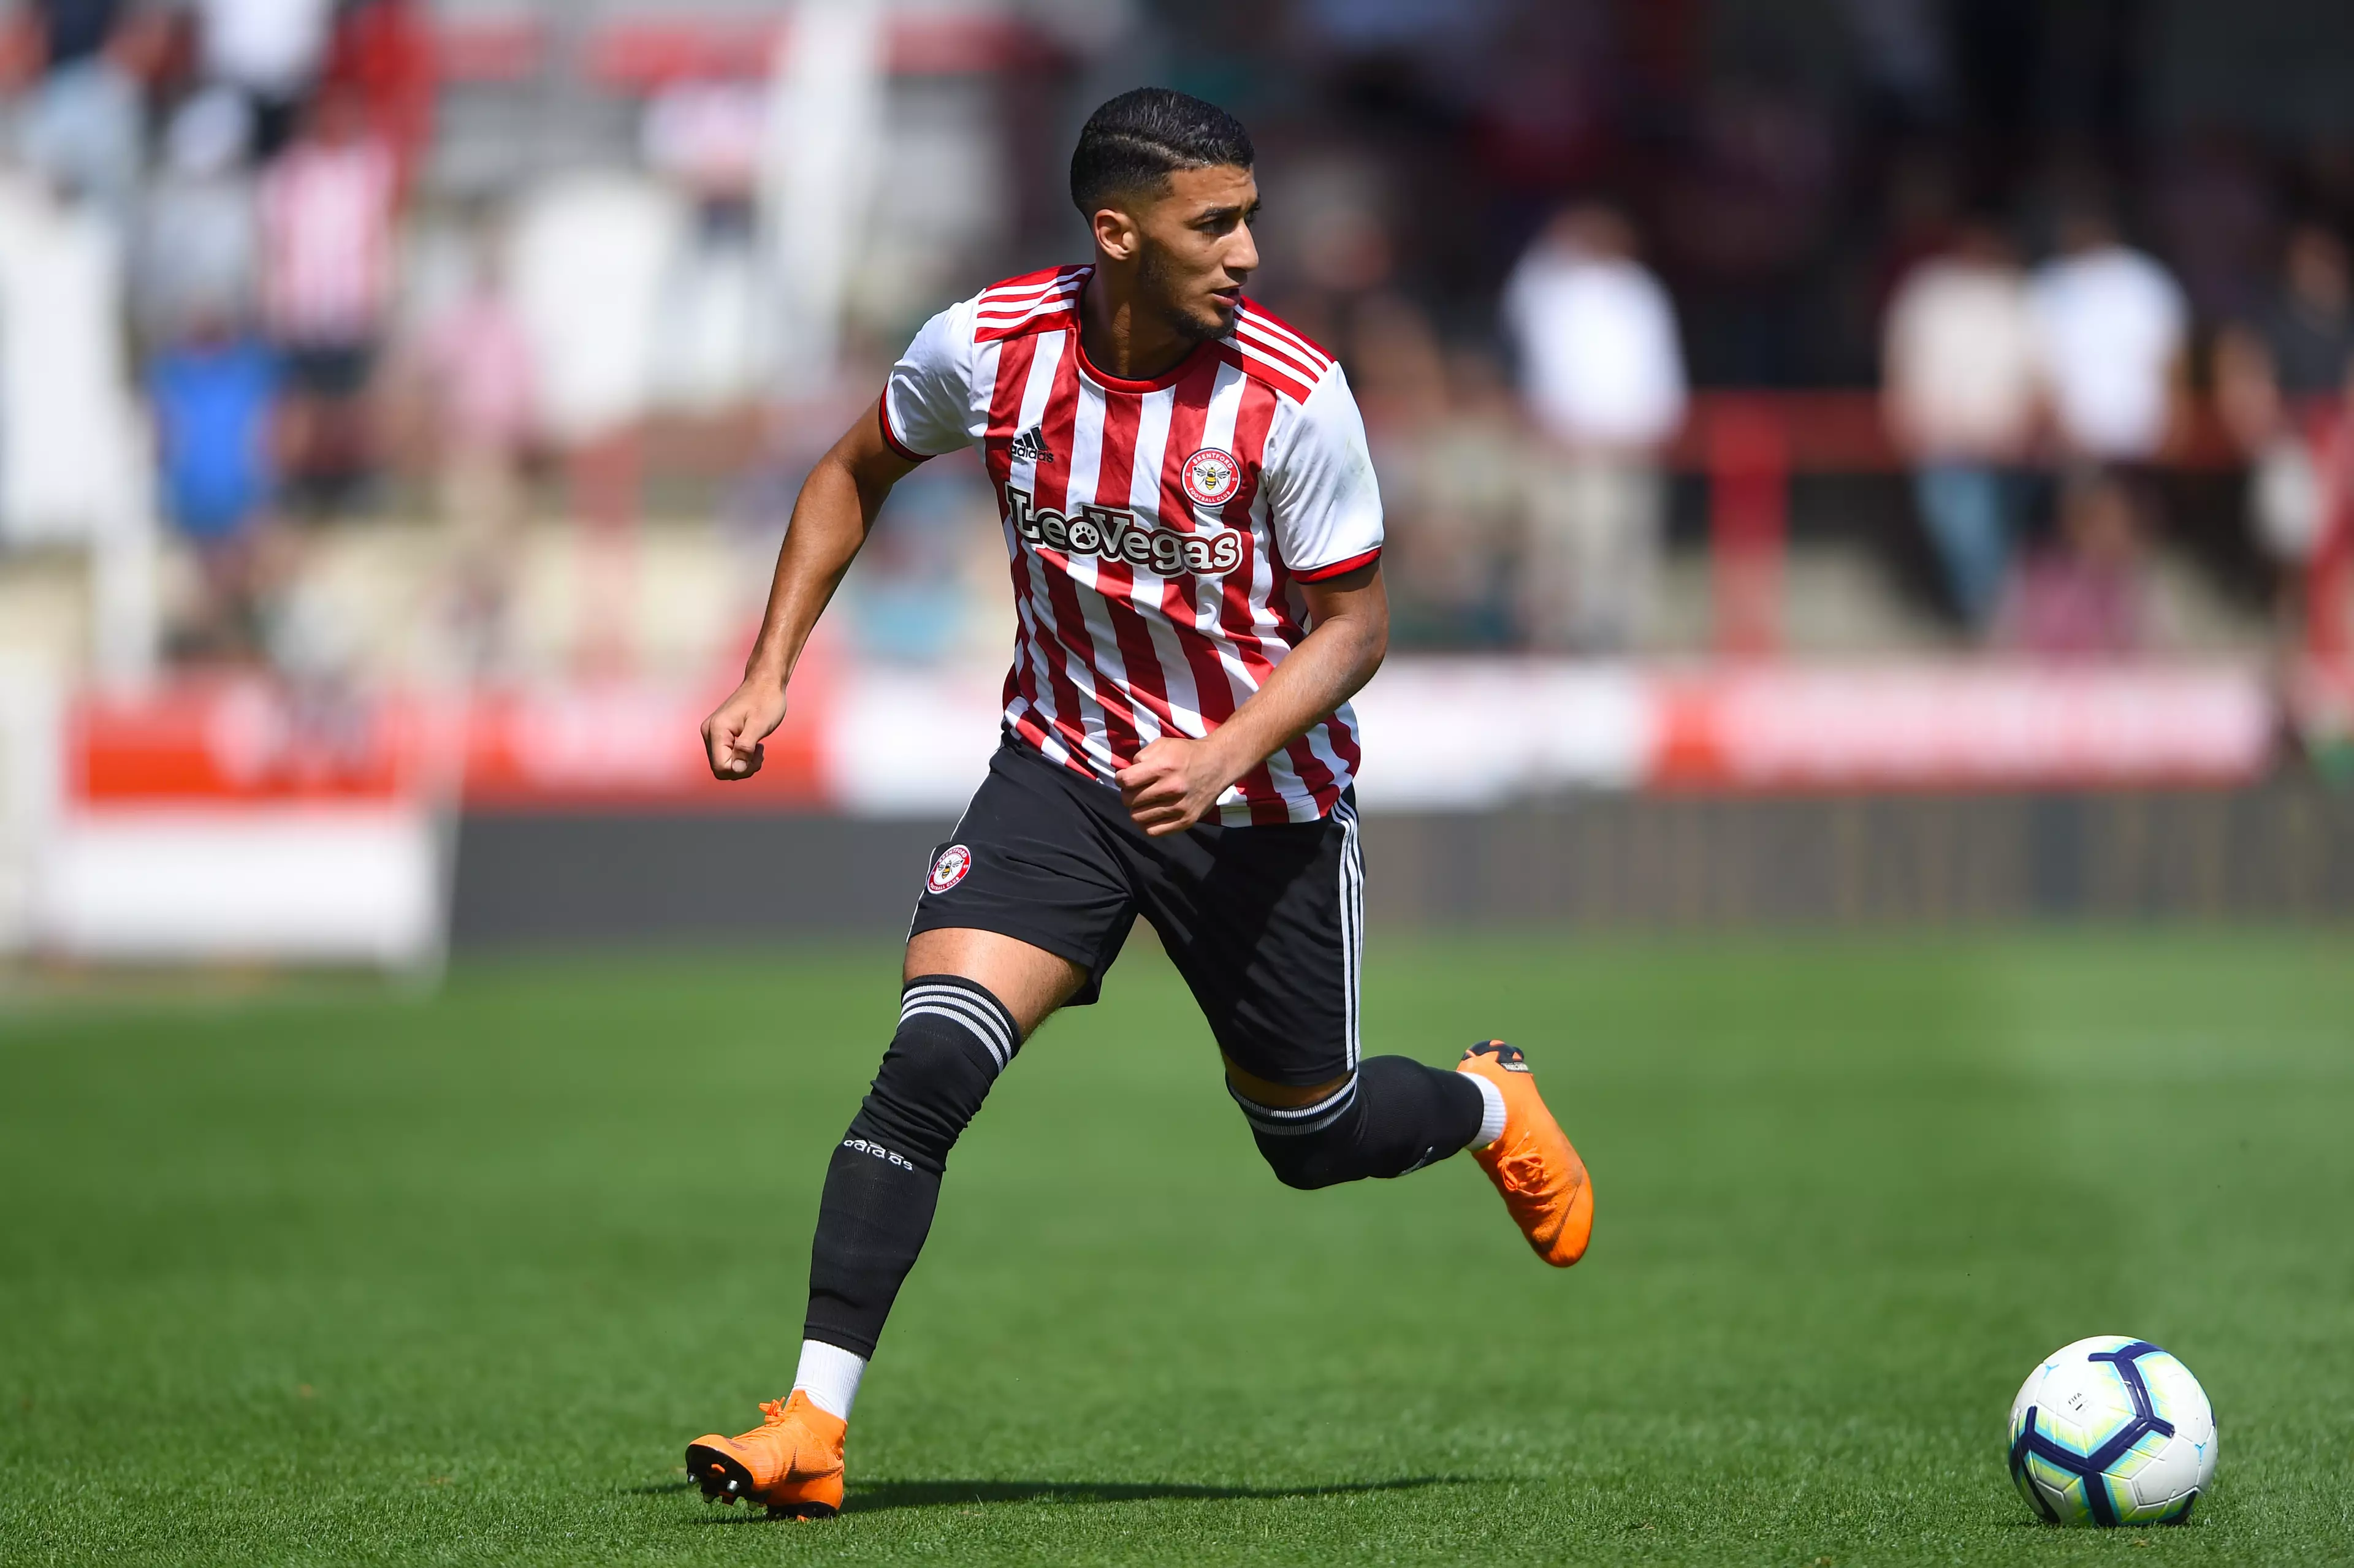 Benrahma in action for Brentford. Image: PA